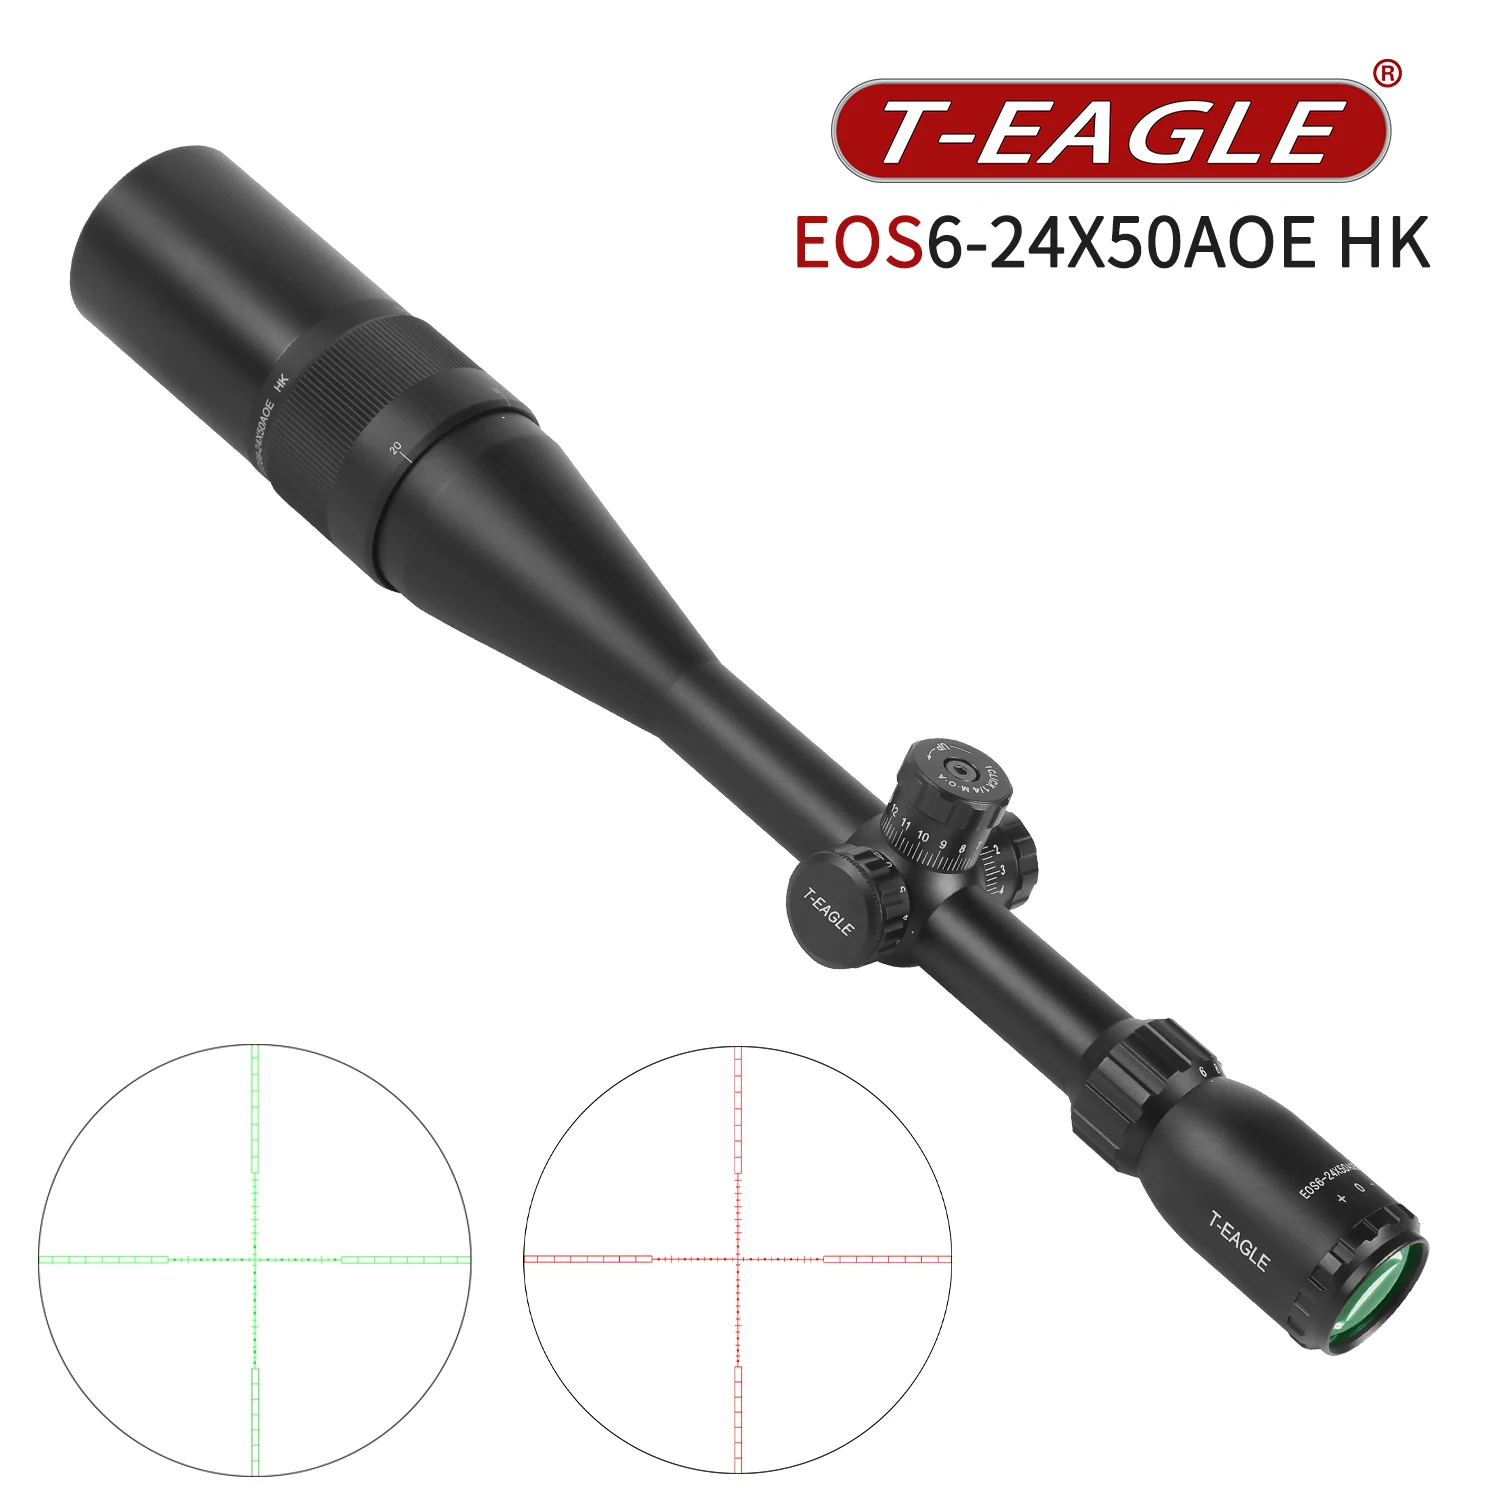 

T-EAGLE EOS 6-24x50 AOE HK Compact Optical Sight Wire Reticle Tactical Riflescope For Hunting Illuminate Optics Airgun Airsoft